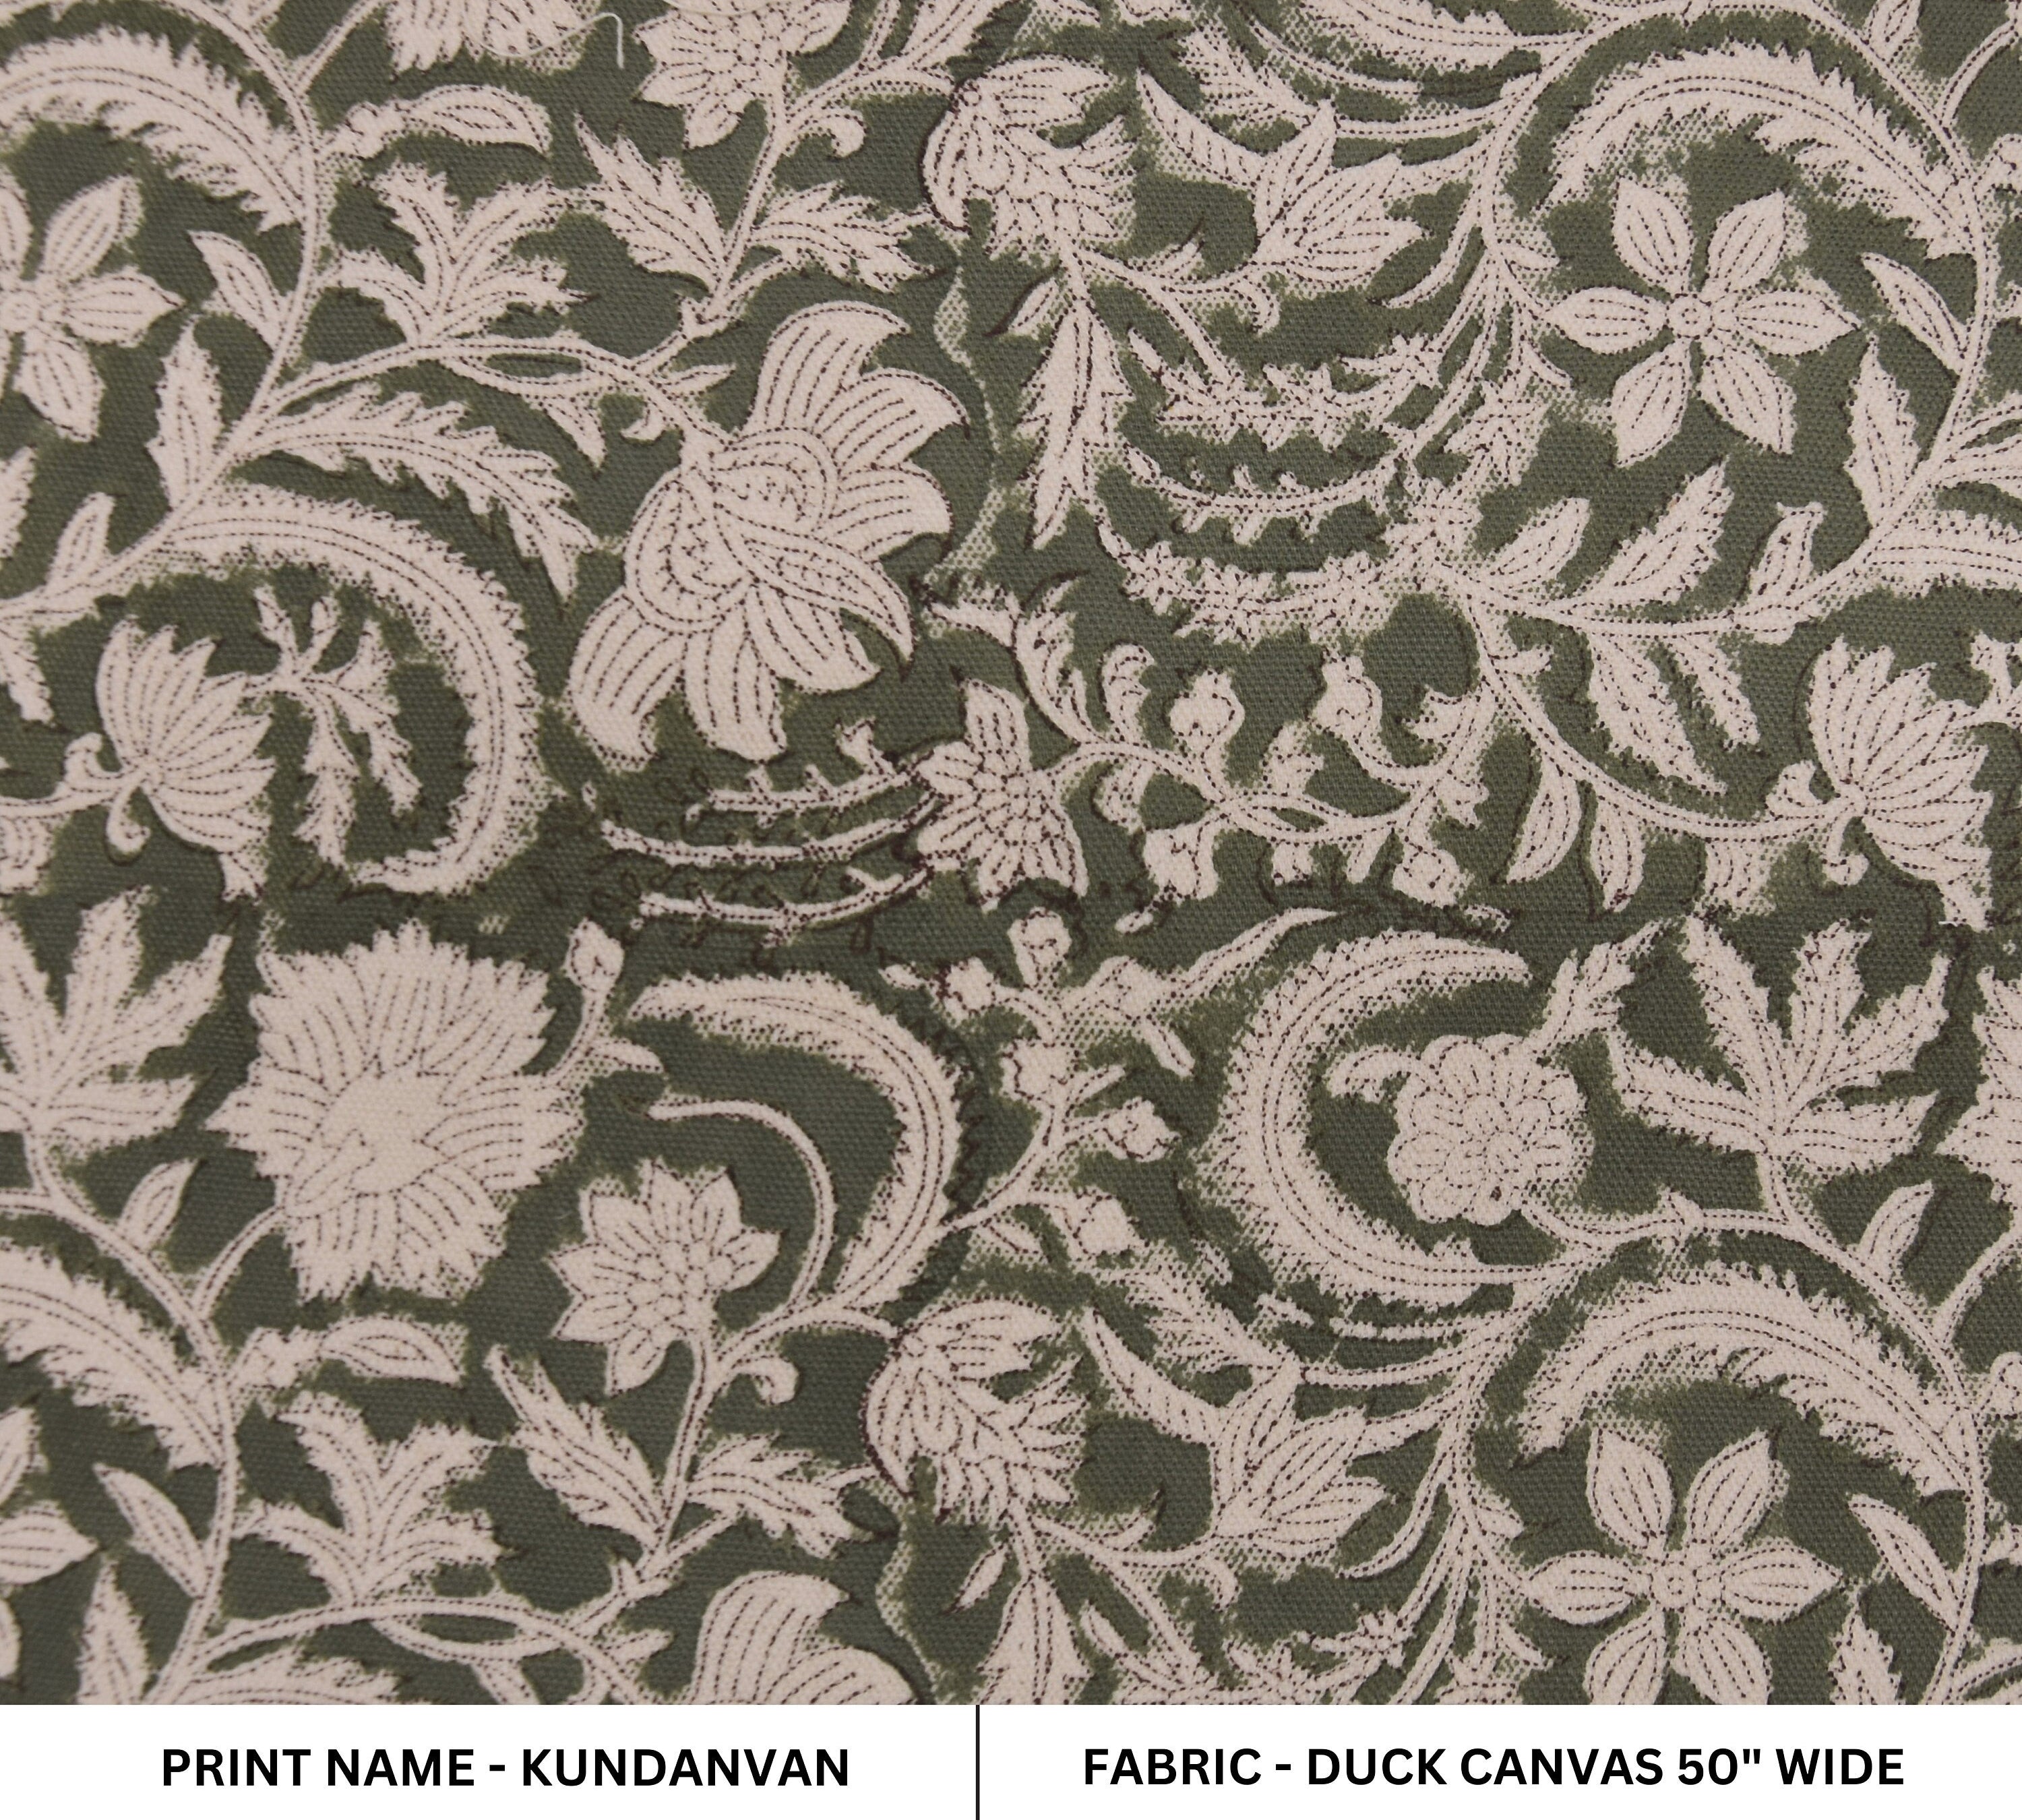 Hand block print , duck canvas 50" wide, table runners and cushion cover, linen fabric, window curtains - KUNDANVAN